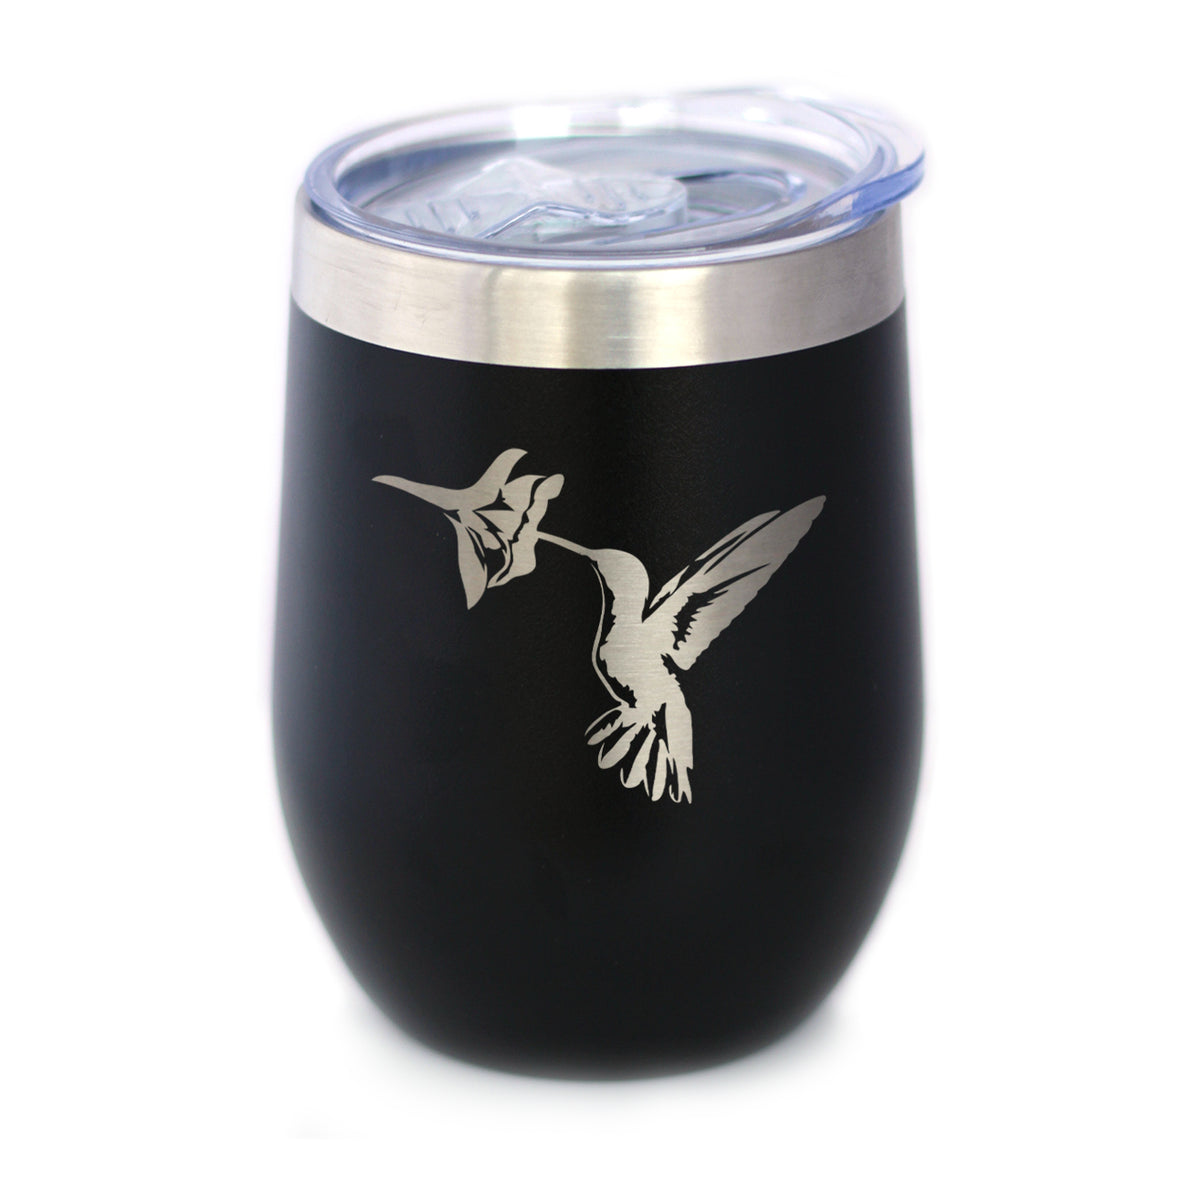 Hummingbird - Wine Tumbler Glass with Sliding Lid - Stainless Steel Insulated Mug - Hummingbird Gifts and Decor for Women and Men